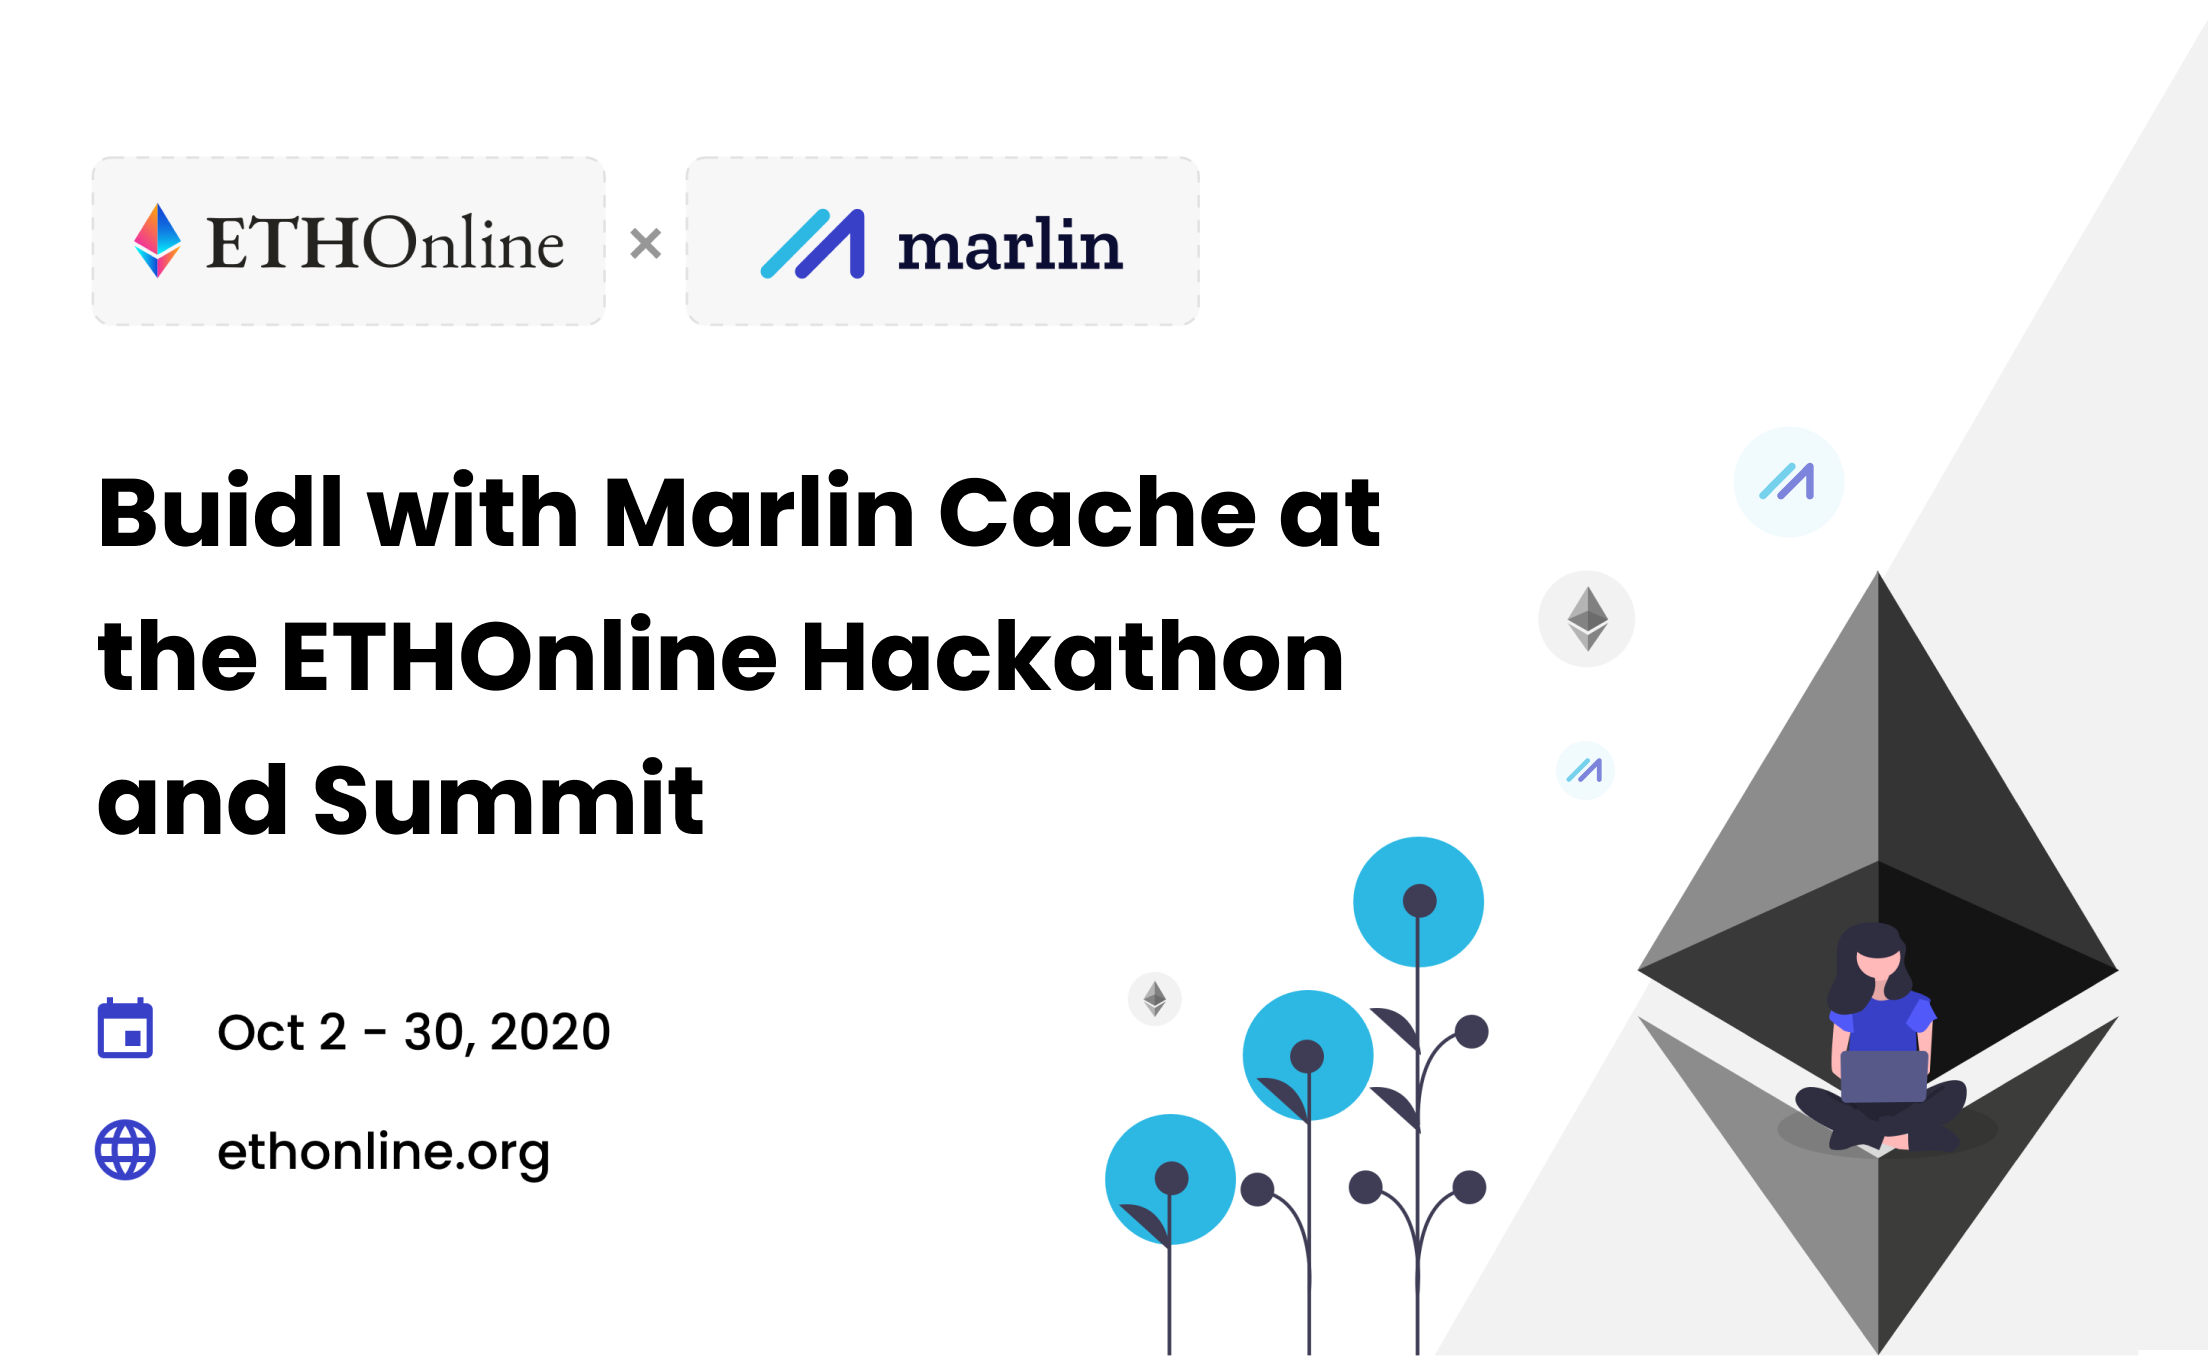 Buidl with Marlin Cache at the ETHOnline Hackathon and Summit